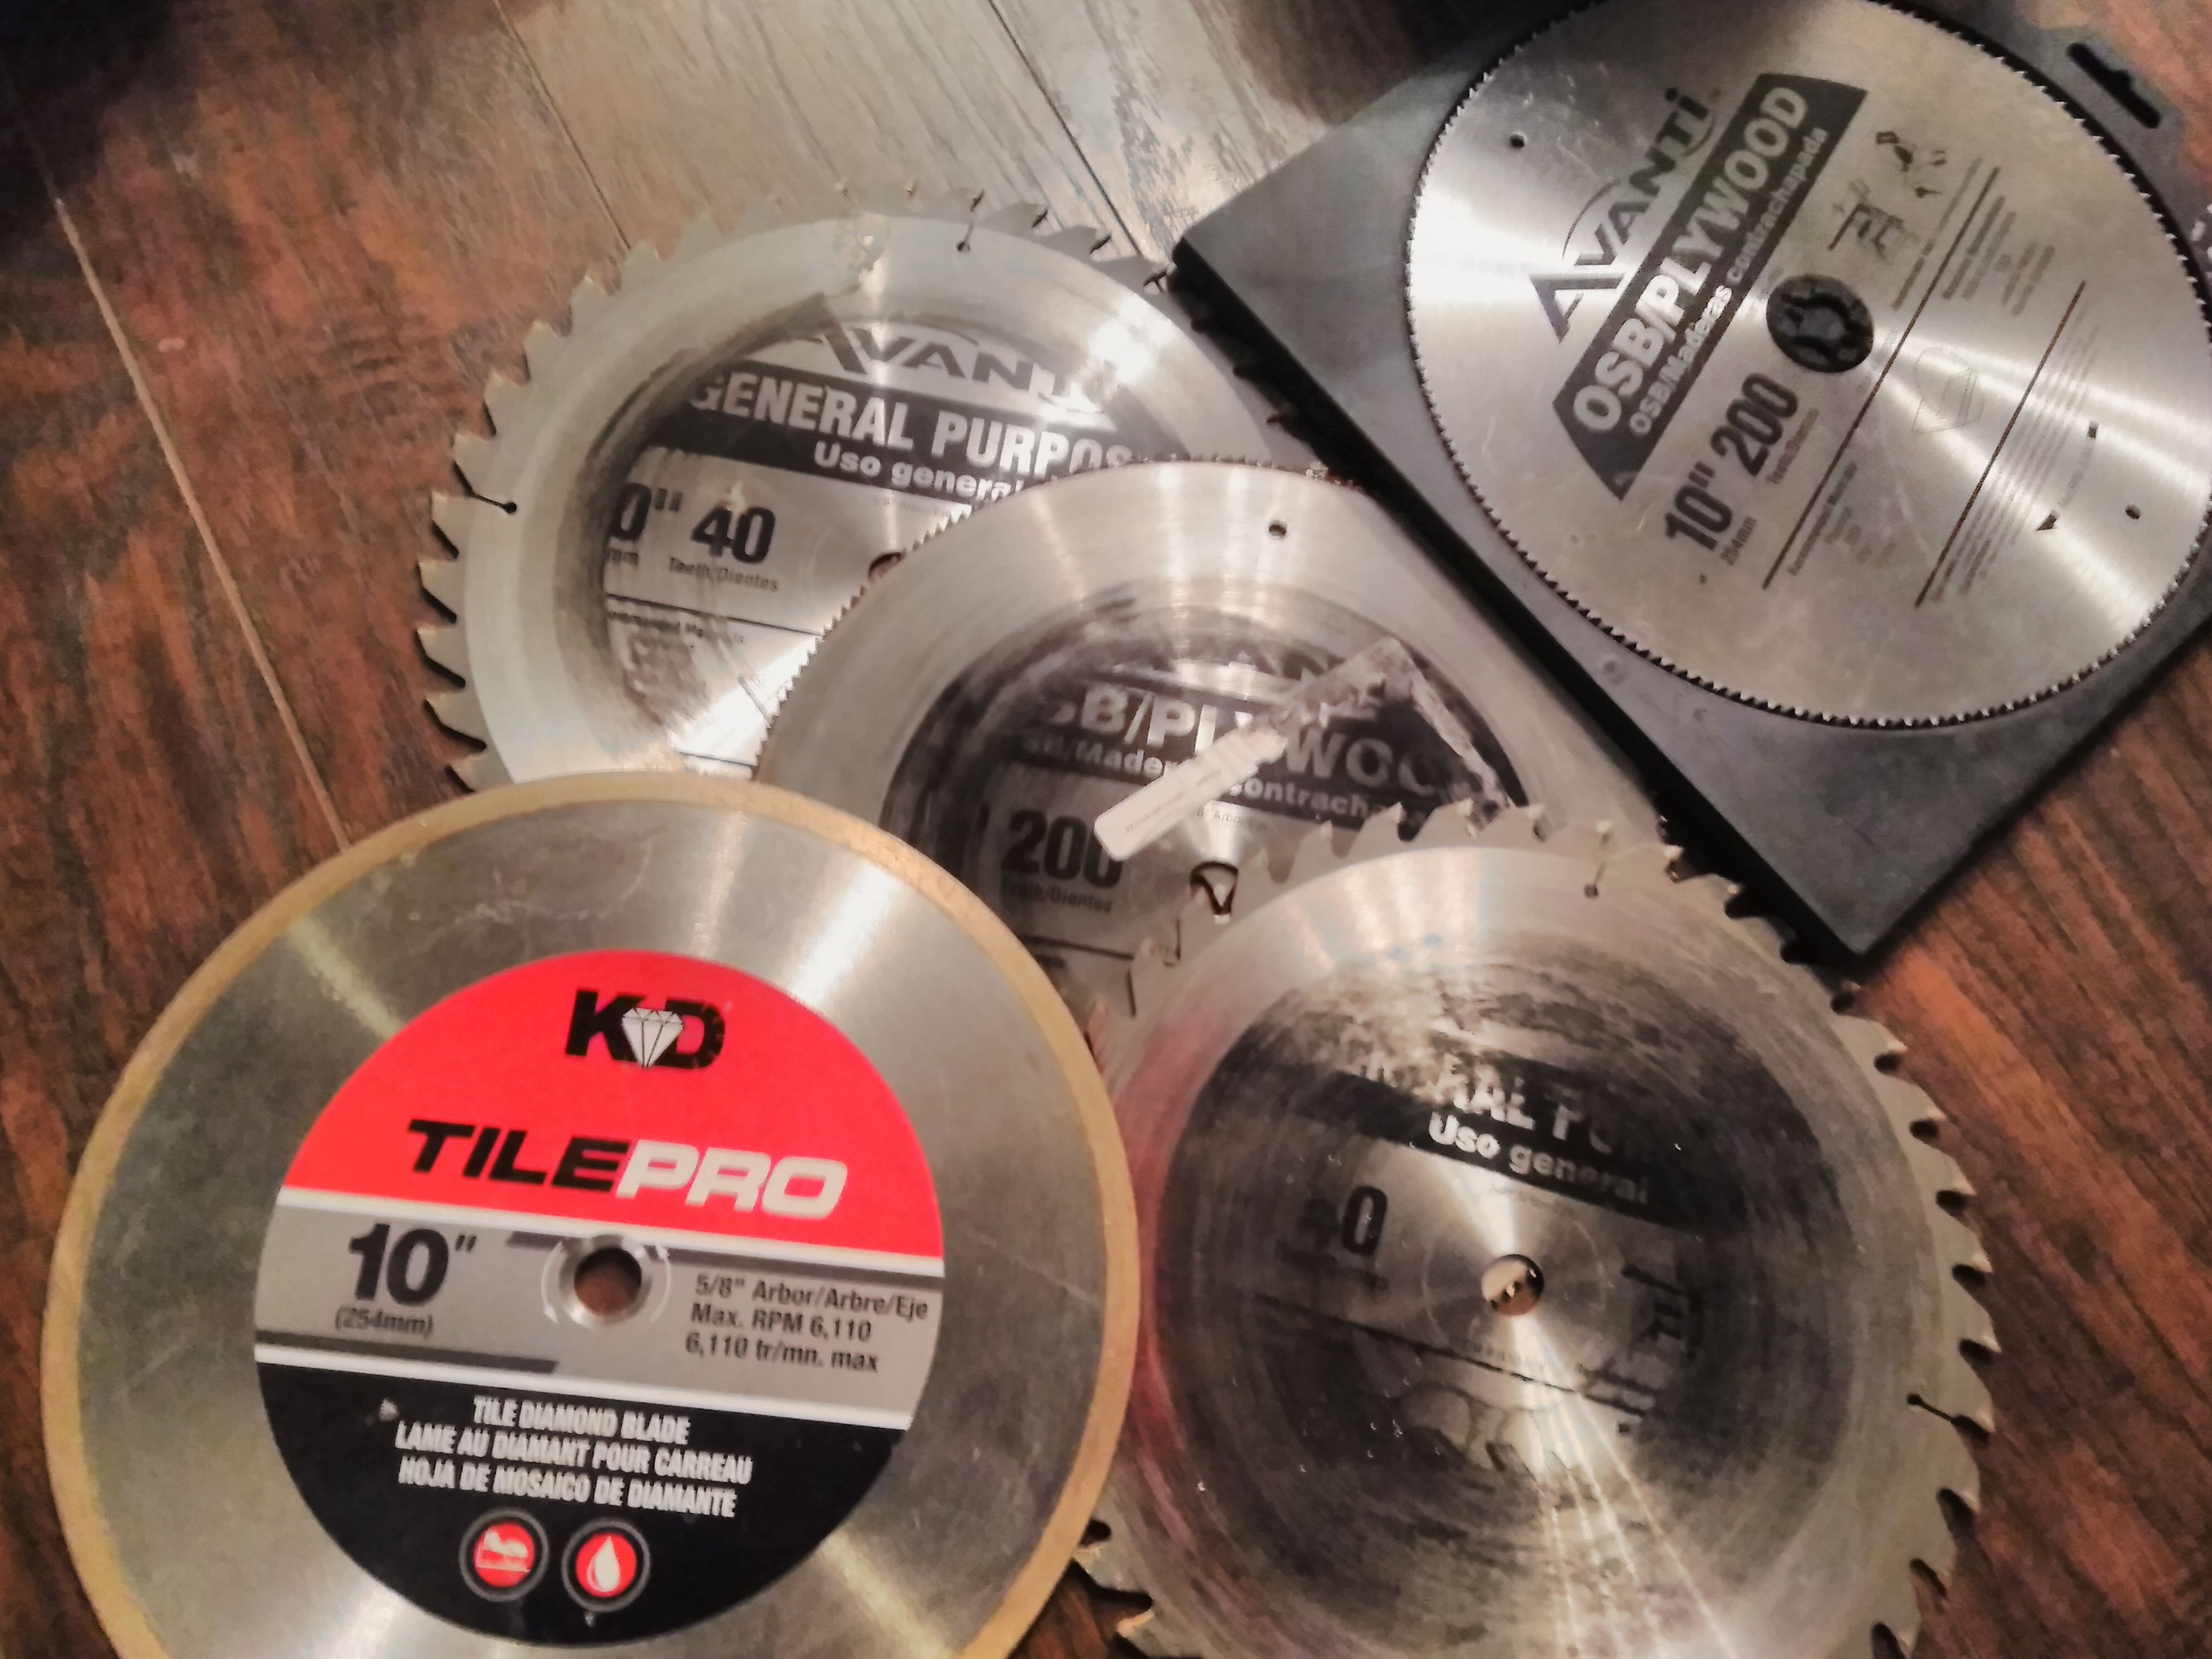 Saw blades ~ Two 40 tooth, Two 200 tooth and a Diamond Blade